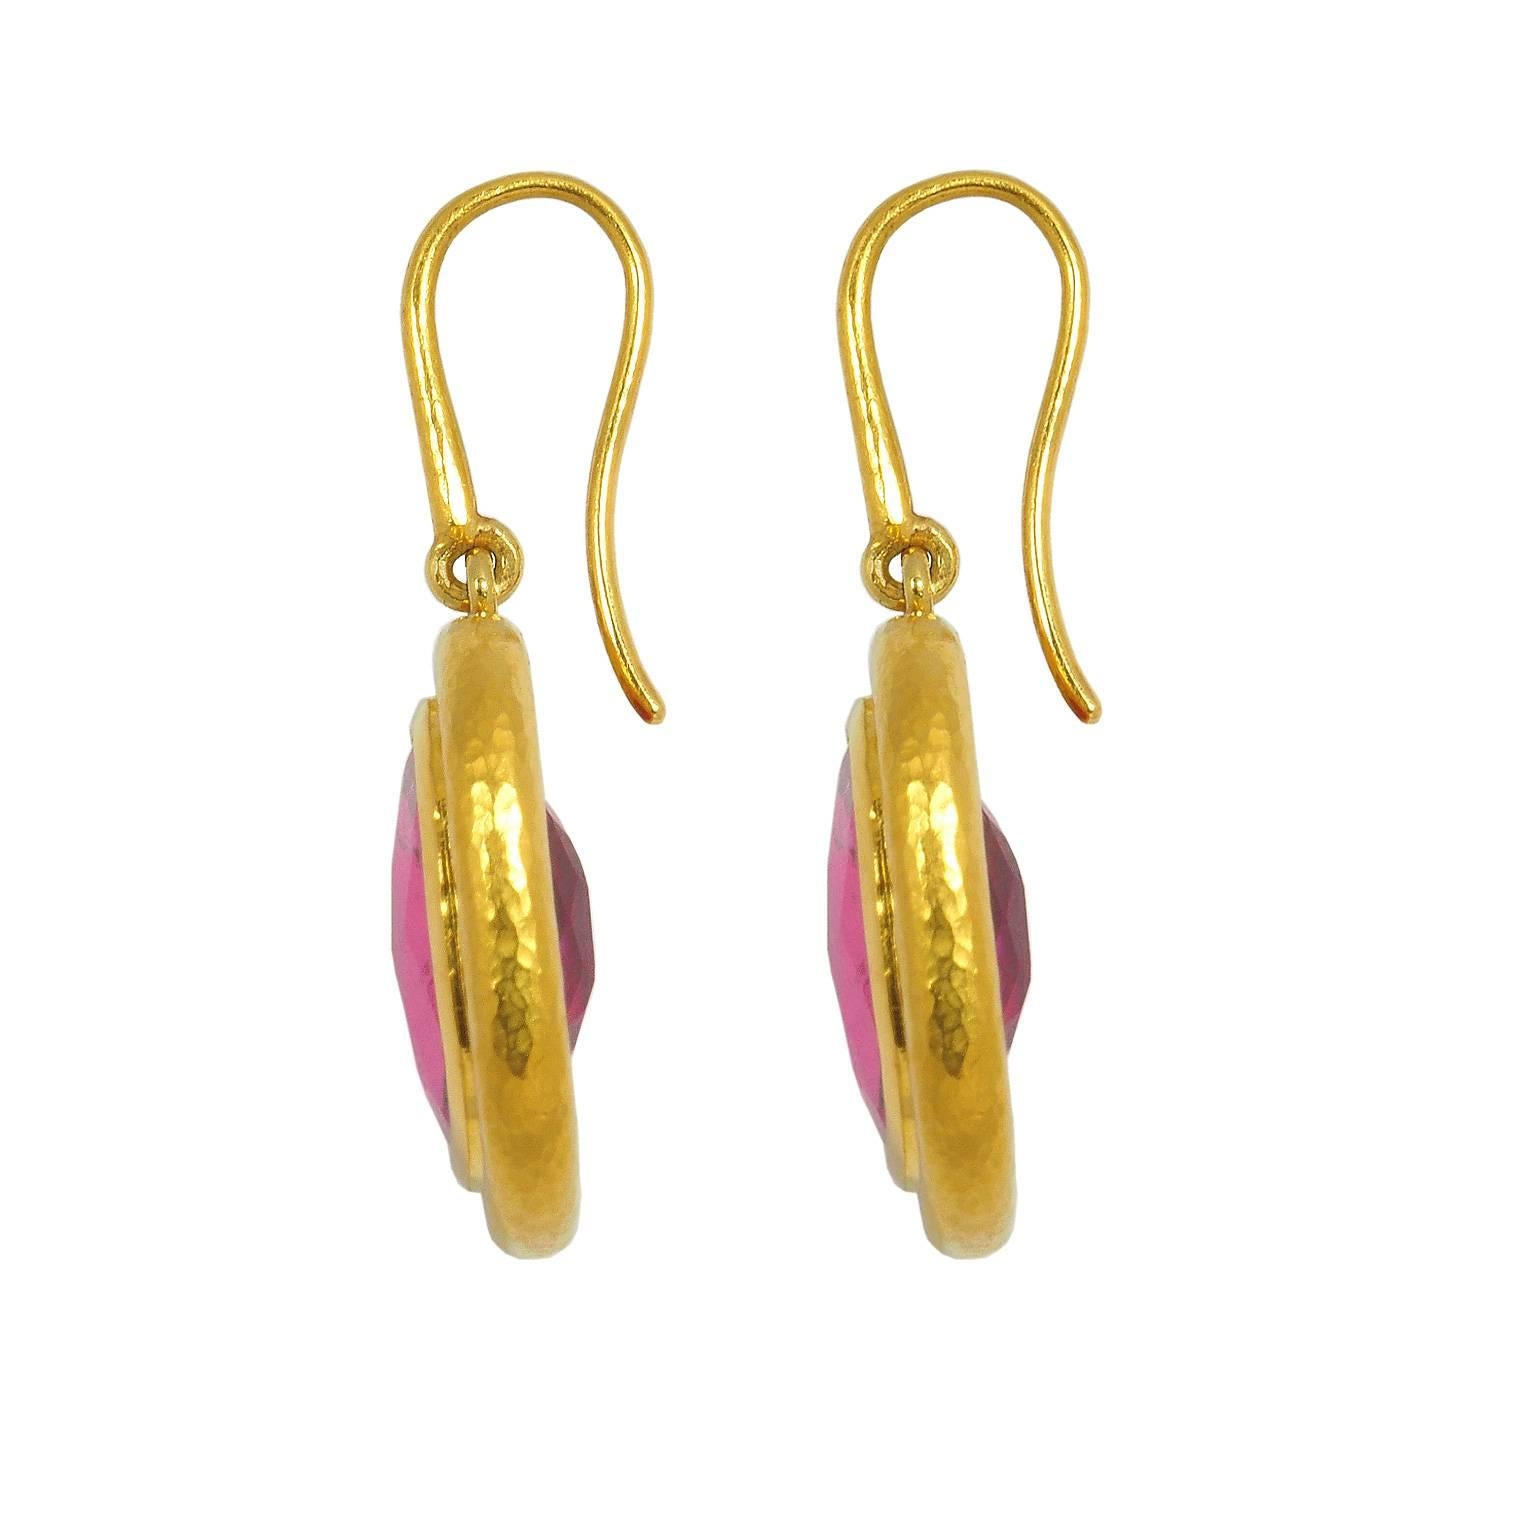 These stunning pink rubellites 14.7 ct are set in 22k hammered yellow gold. Ready to wear drop earrings designed by Colleen B. Rosenblat.